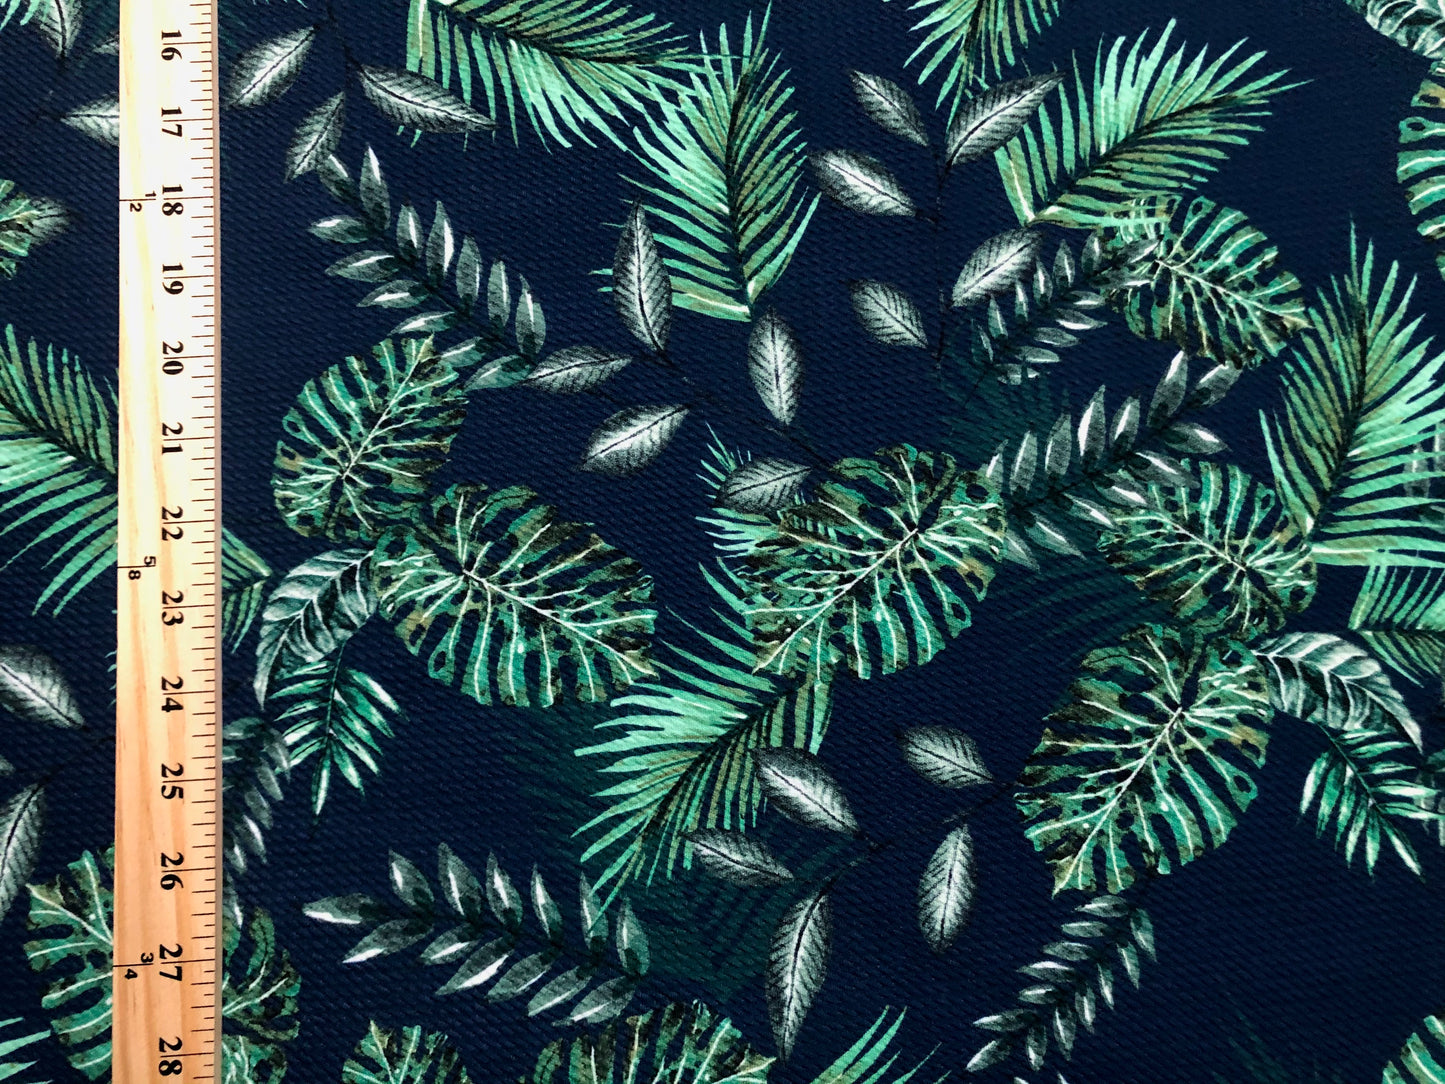 Bullet Knit Printed Fabric-Navy Blue Green Palms-BPR234-Sold by the Yard